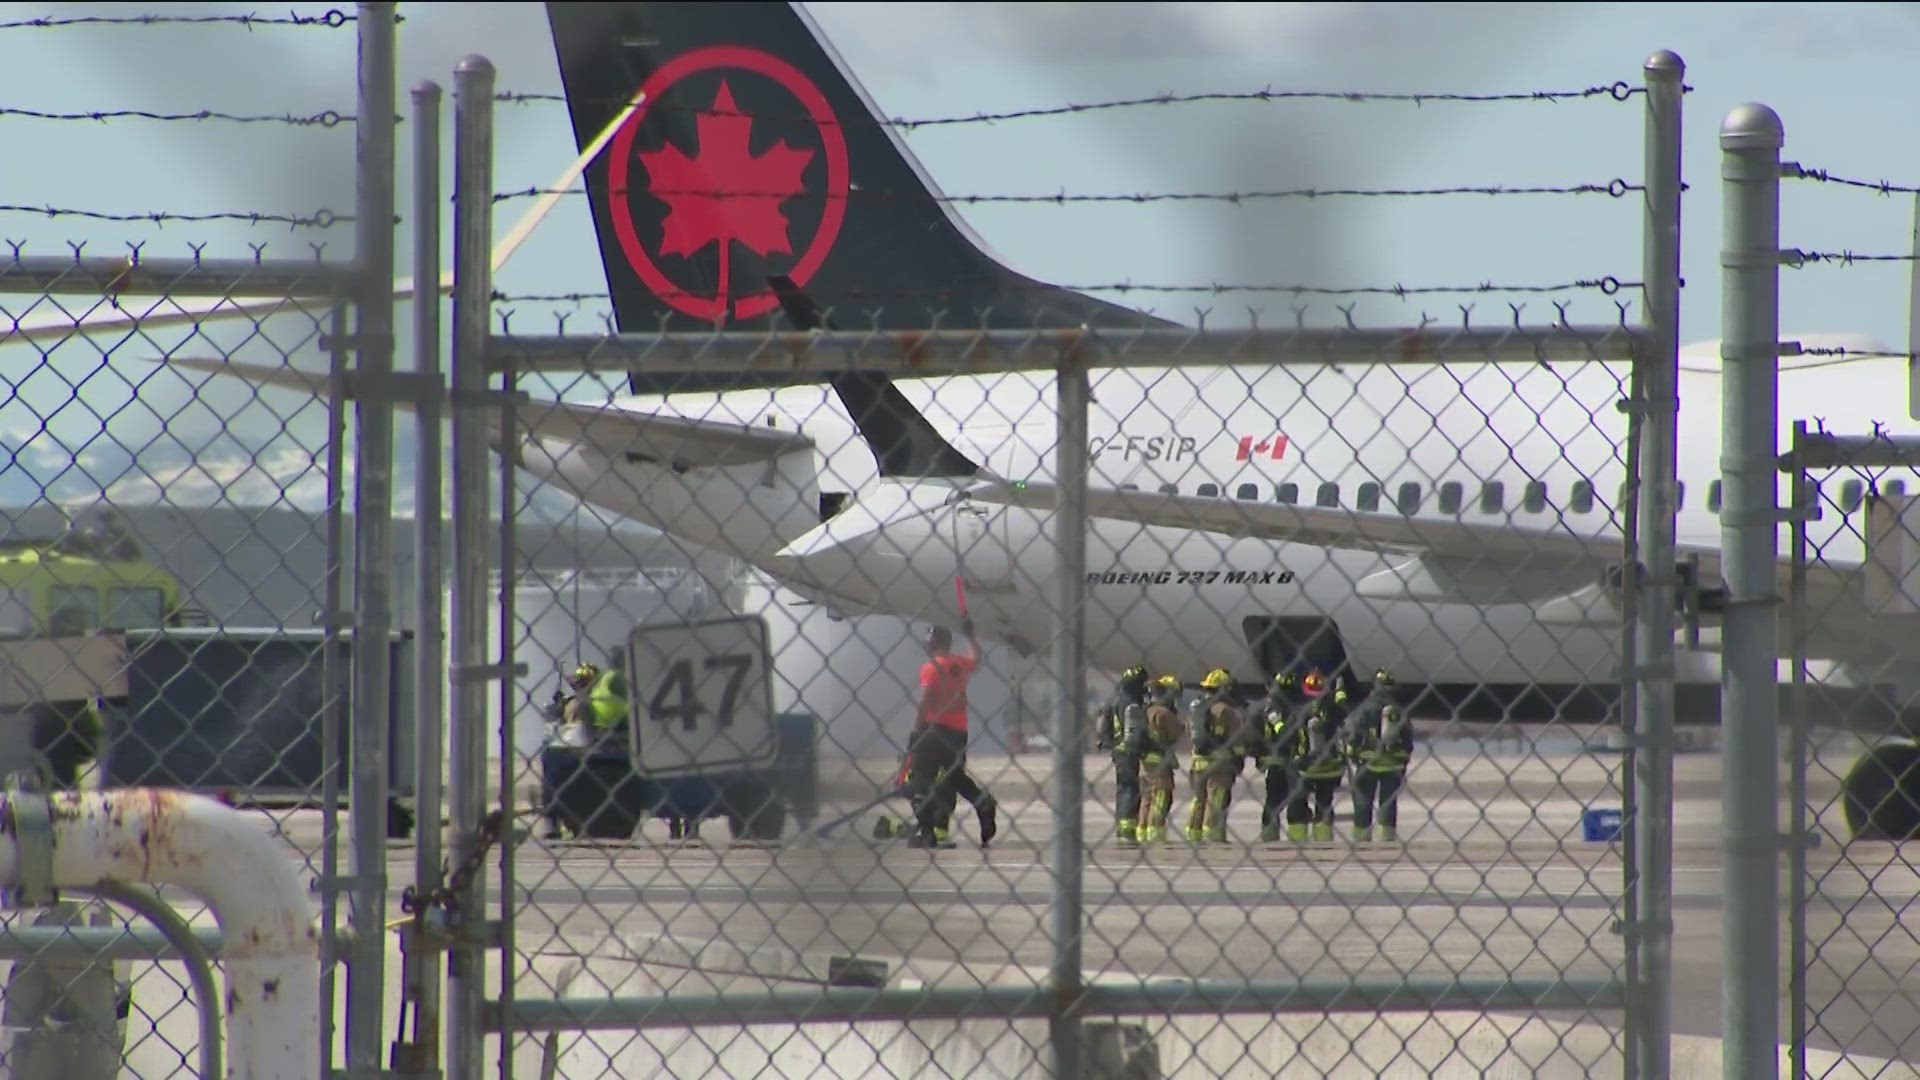 Air Canada Flight #997 declared an in-flight emergency before making an unplanned landing at Boise Airport Tuesday morning. No injuries were reported.